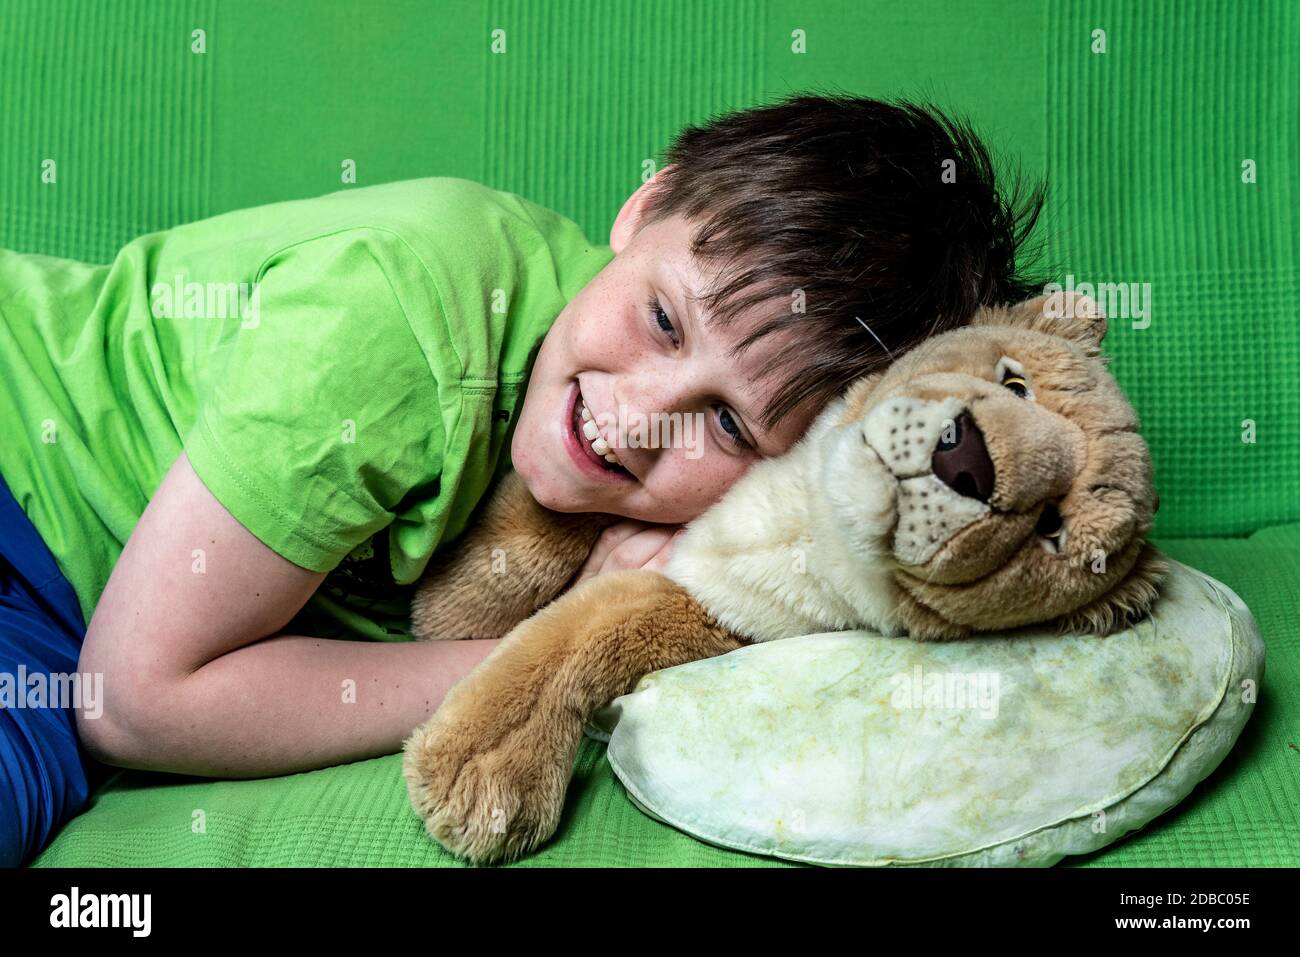 Smiling boy with a plush toy laying on a couch Stock Photo